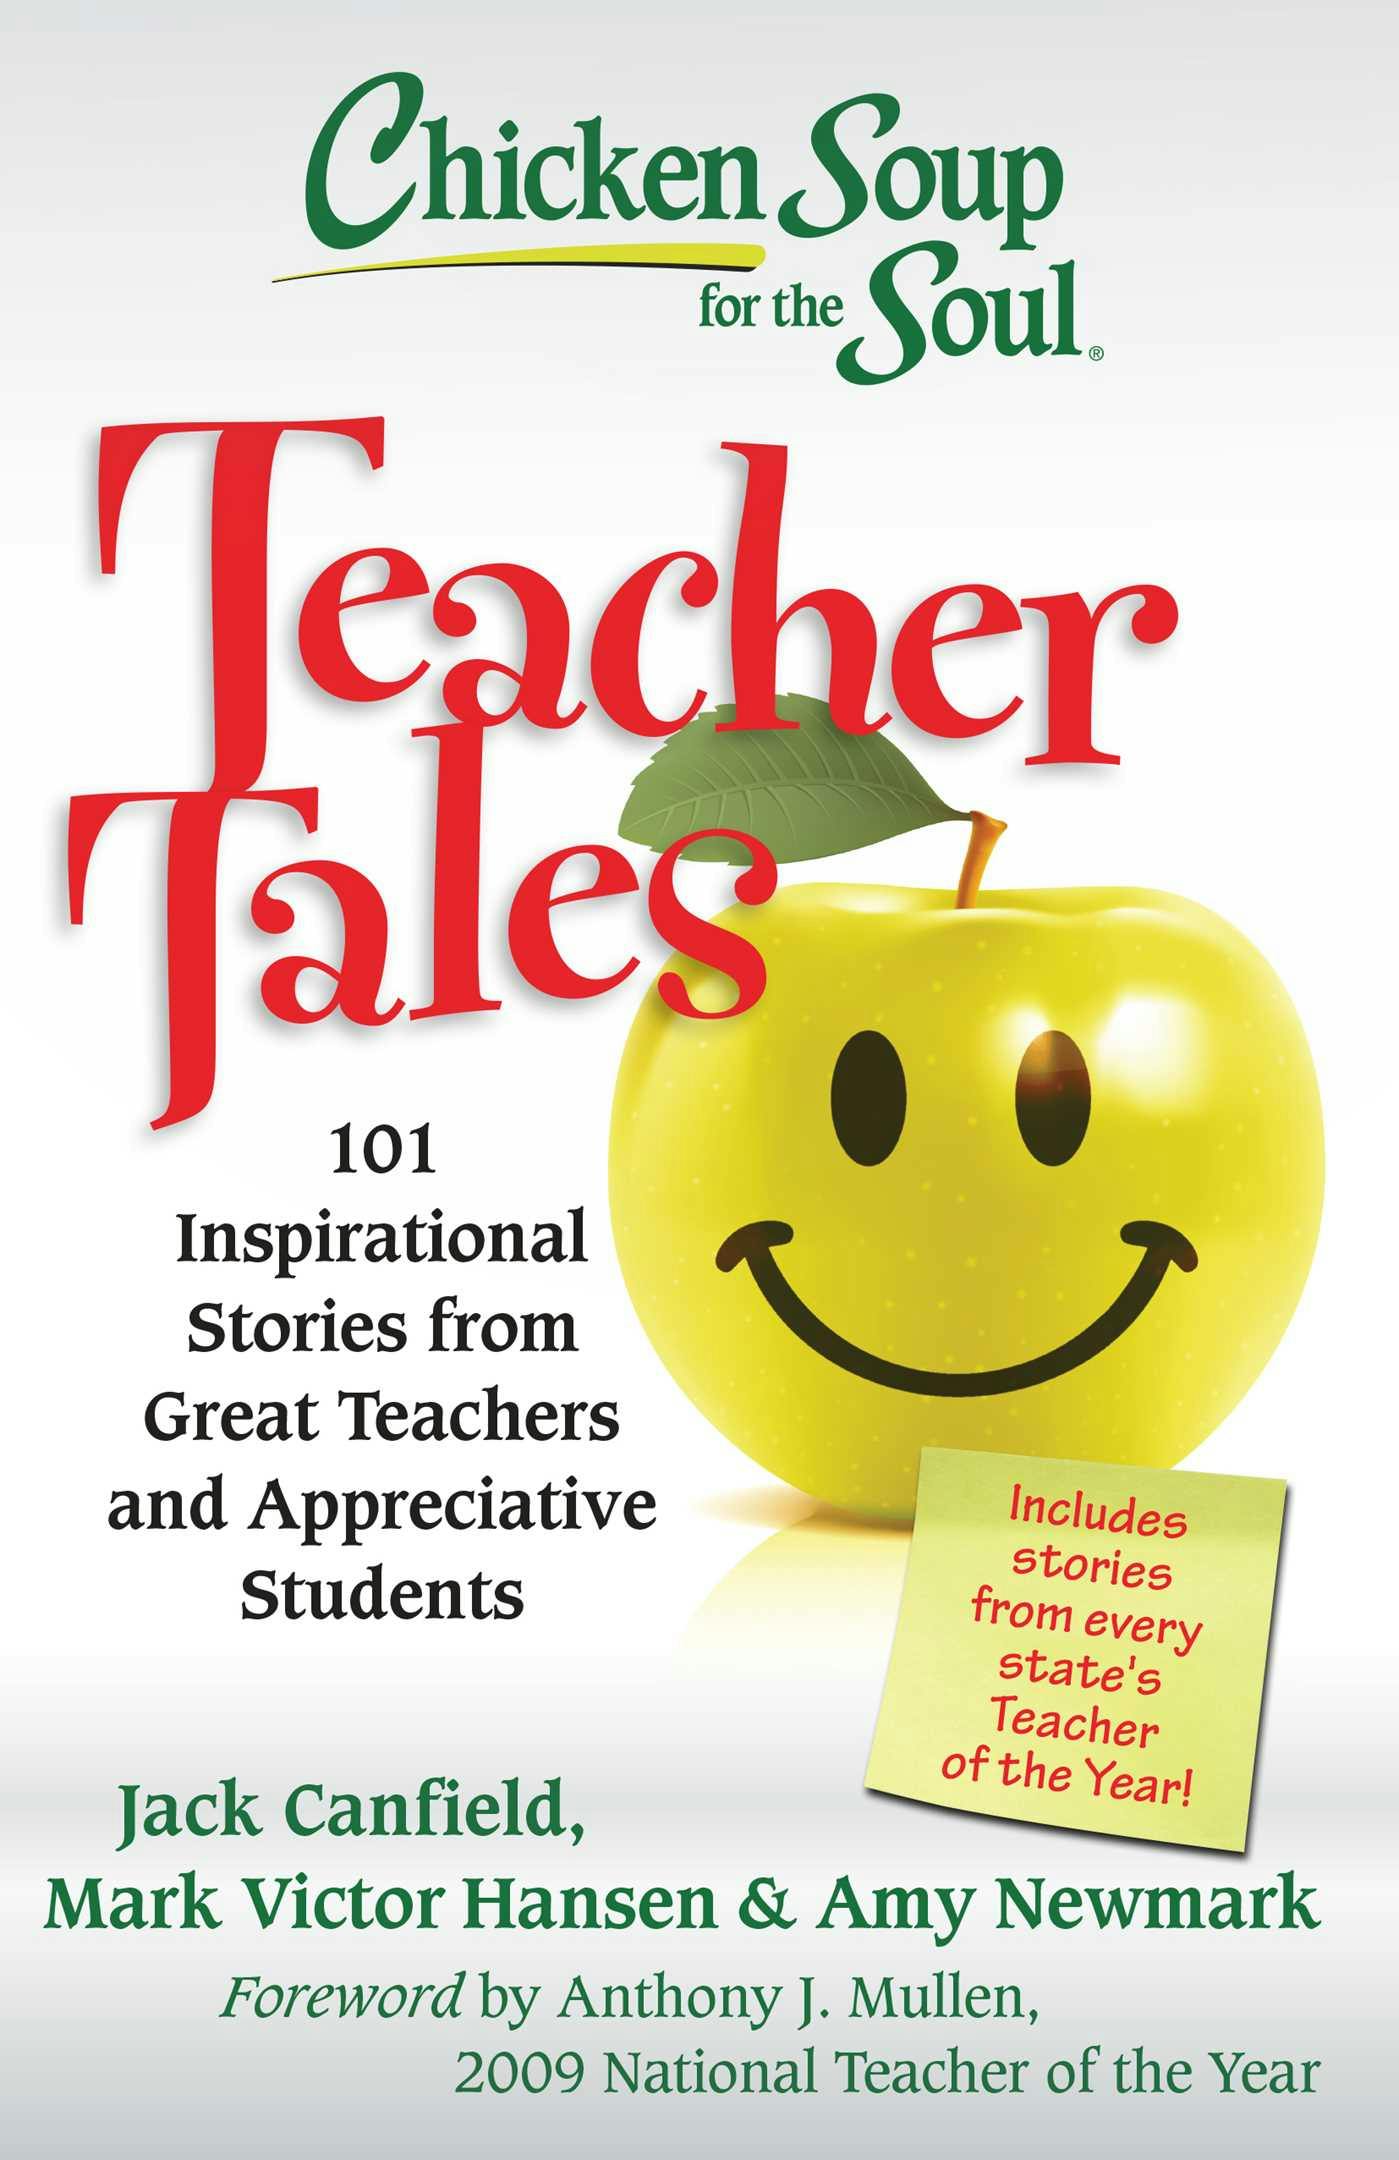 Chicken Soup for the Soul: Teacher Tales: 101 Inspirational Stories from Great Teachers and Appreciative Students - Mark Victor Hansen, Jack Canfield, Amy Newmark